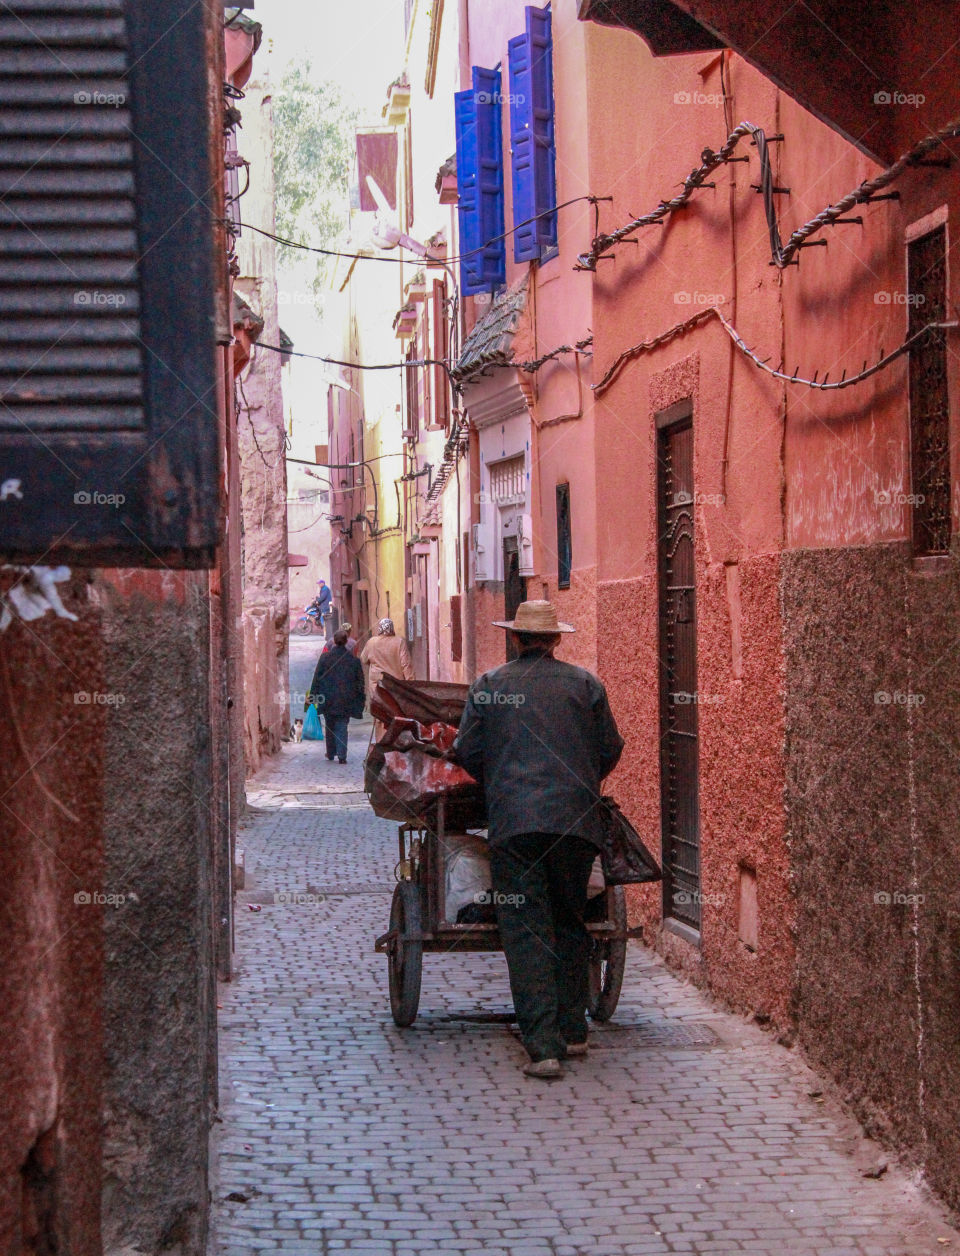 Exploring the streets of Morroco